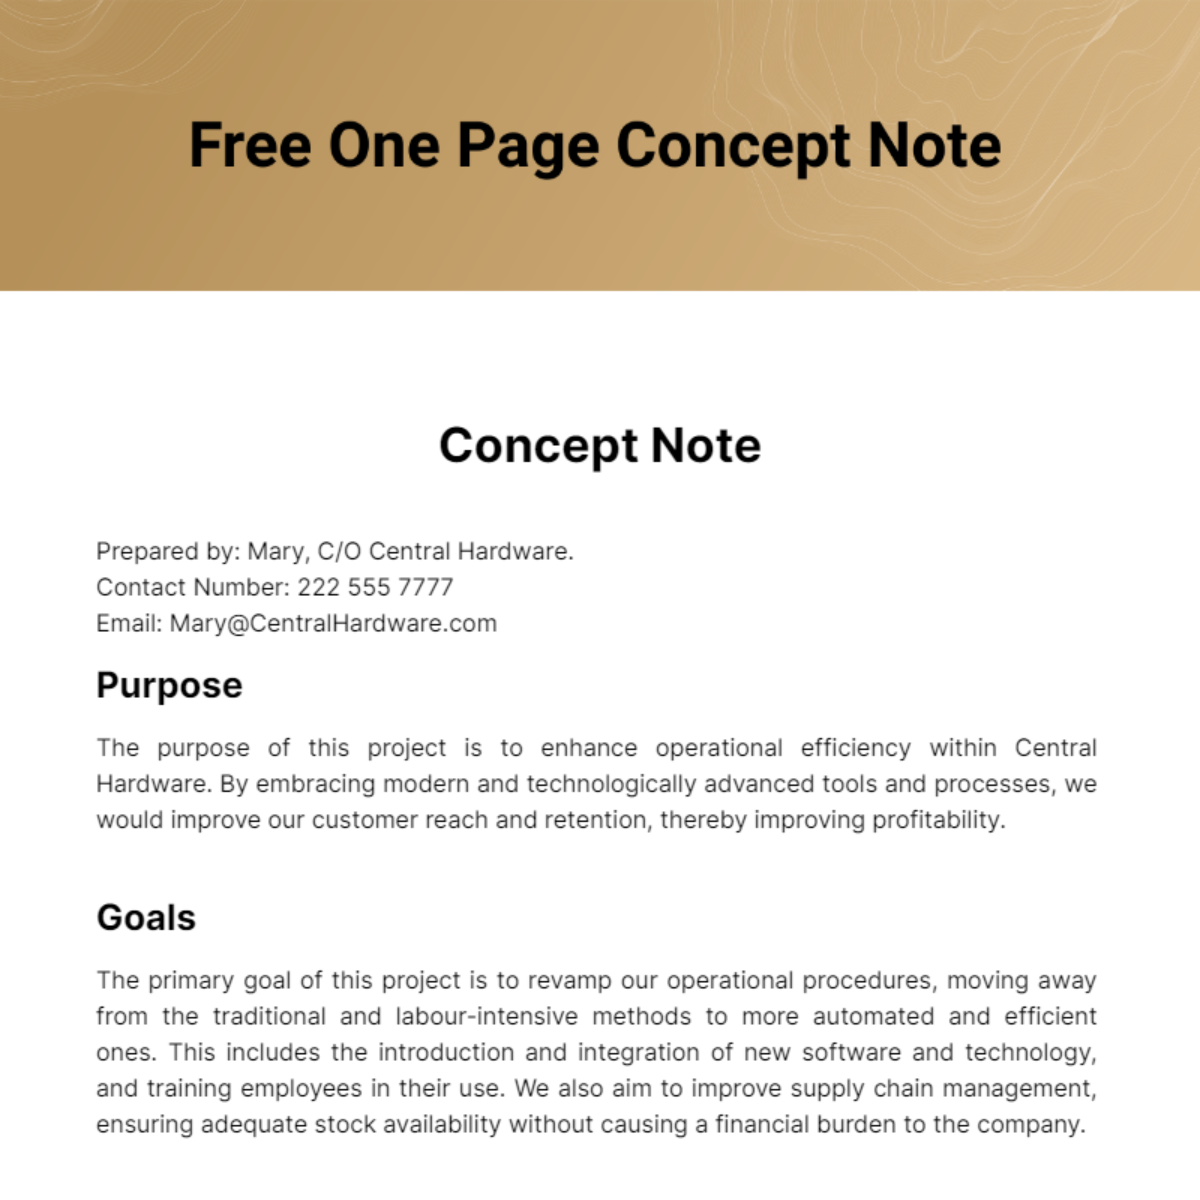 Free One Page Concept Note Template